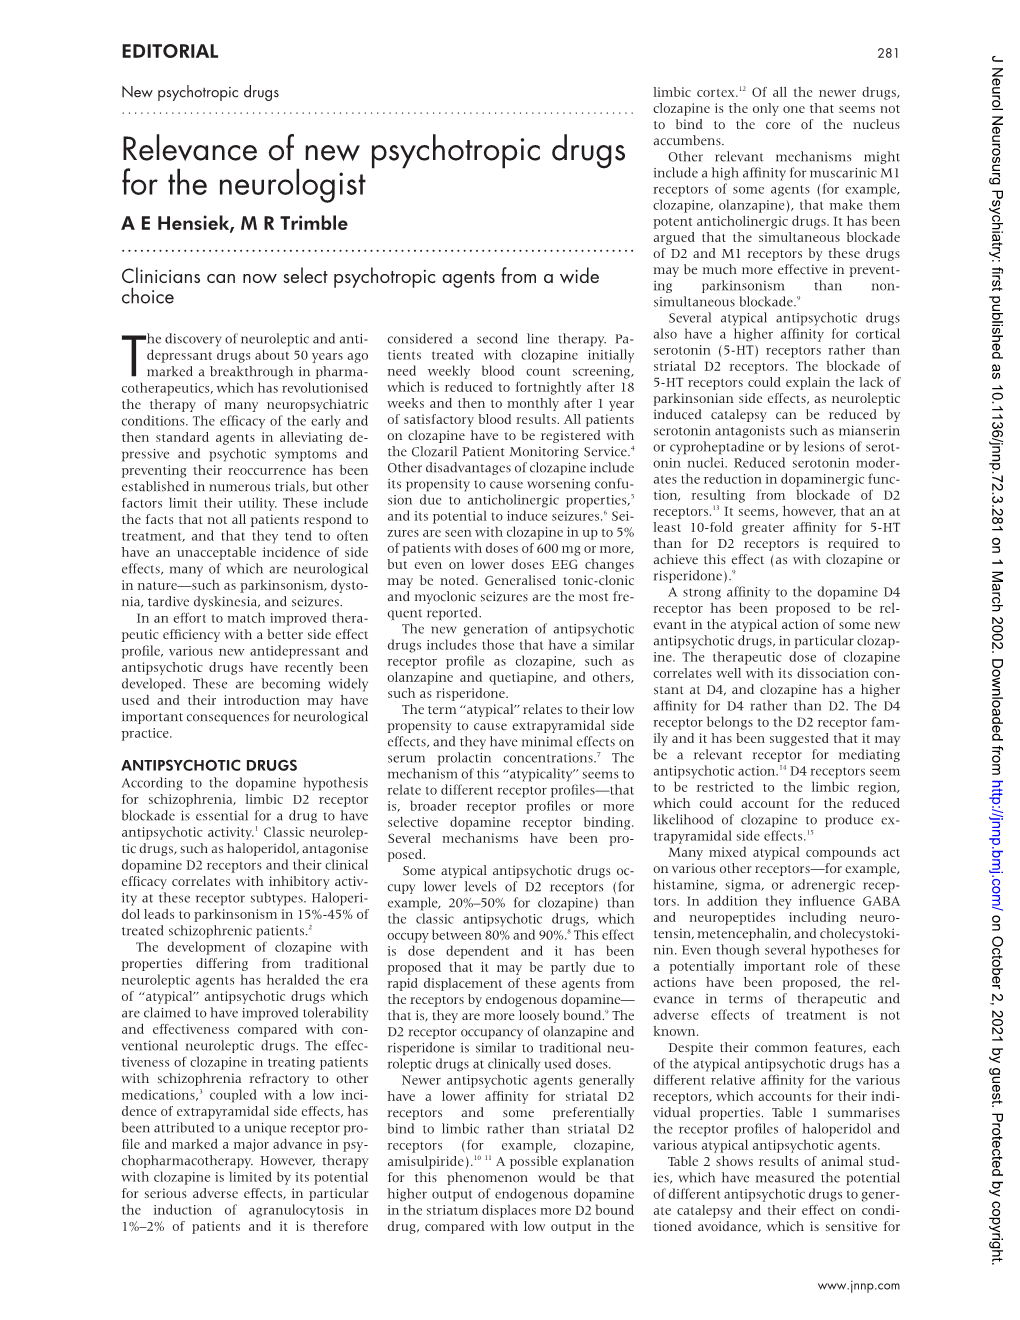 Relevance of New Psychotropic Drugs for the Neurologist